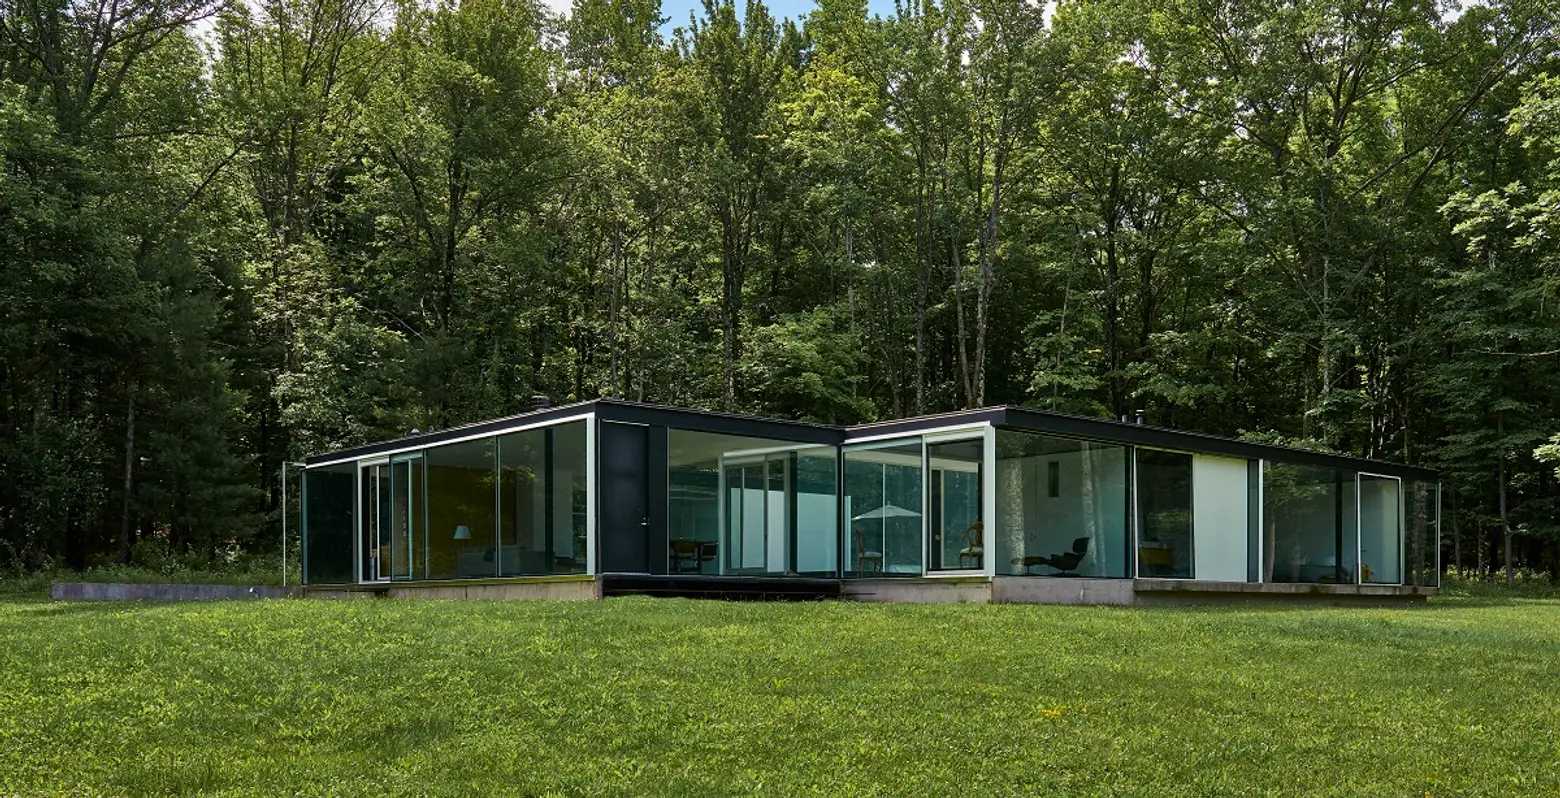 $2M Gefter-Press House Was Designed as an Homage to Philip Johnson’s Glass House